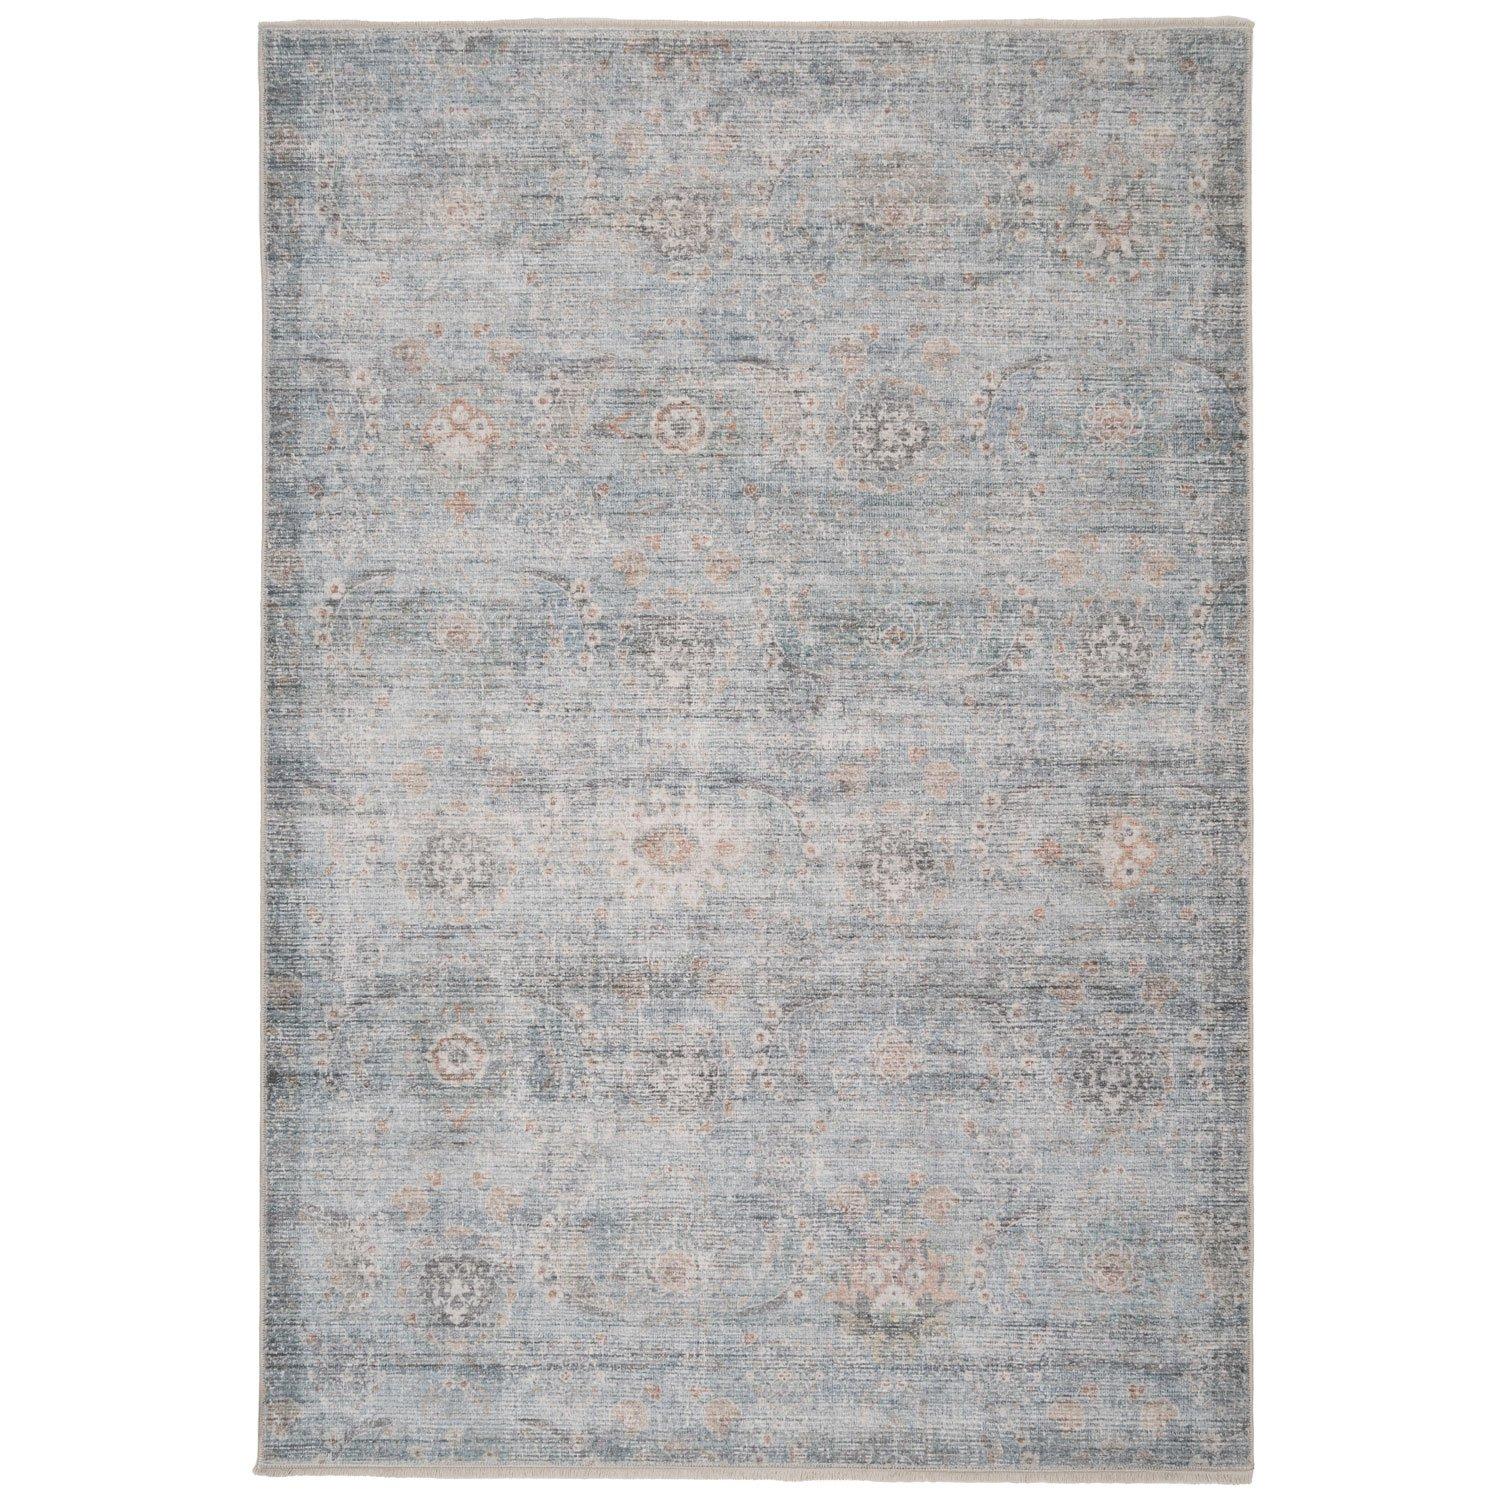 Blue Grey Traditional Distressed Finish Living Area Rug